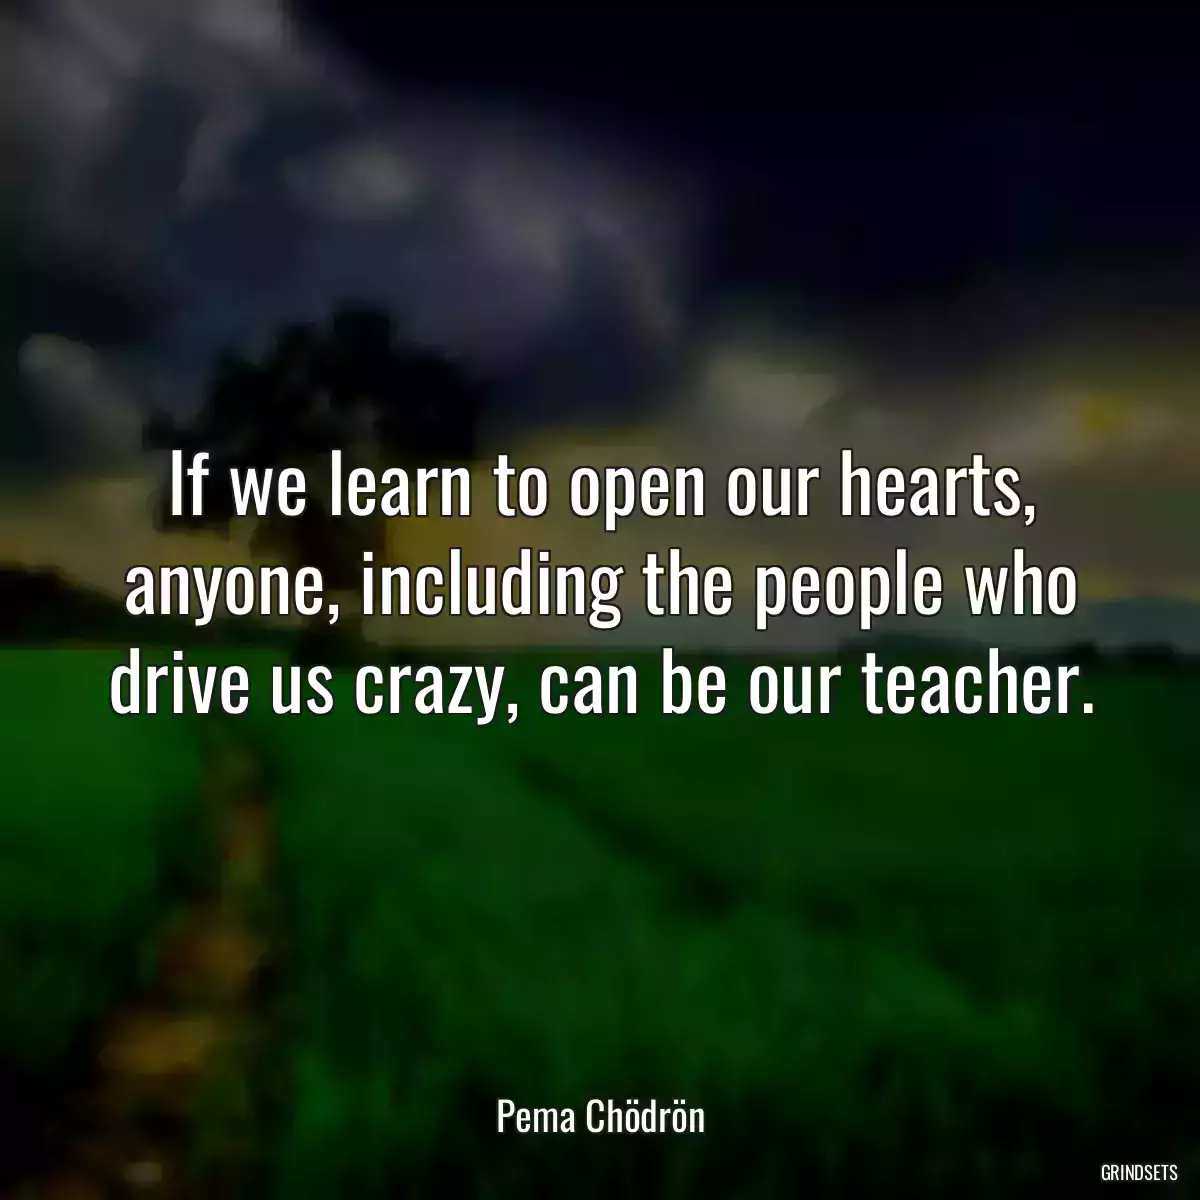 If we learn to open our hearts, anyone, including the people who drive us crazy, can be our teacher.